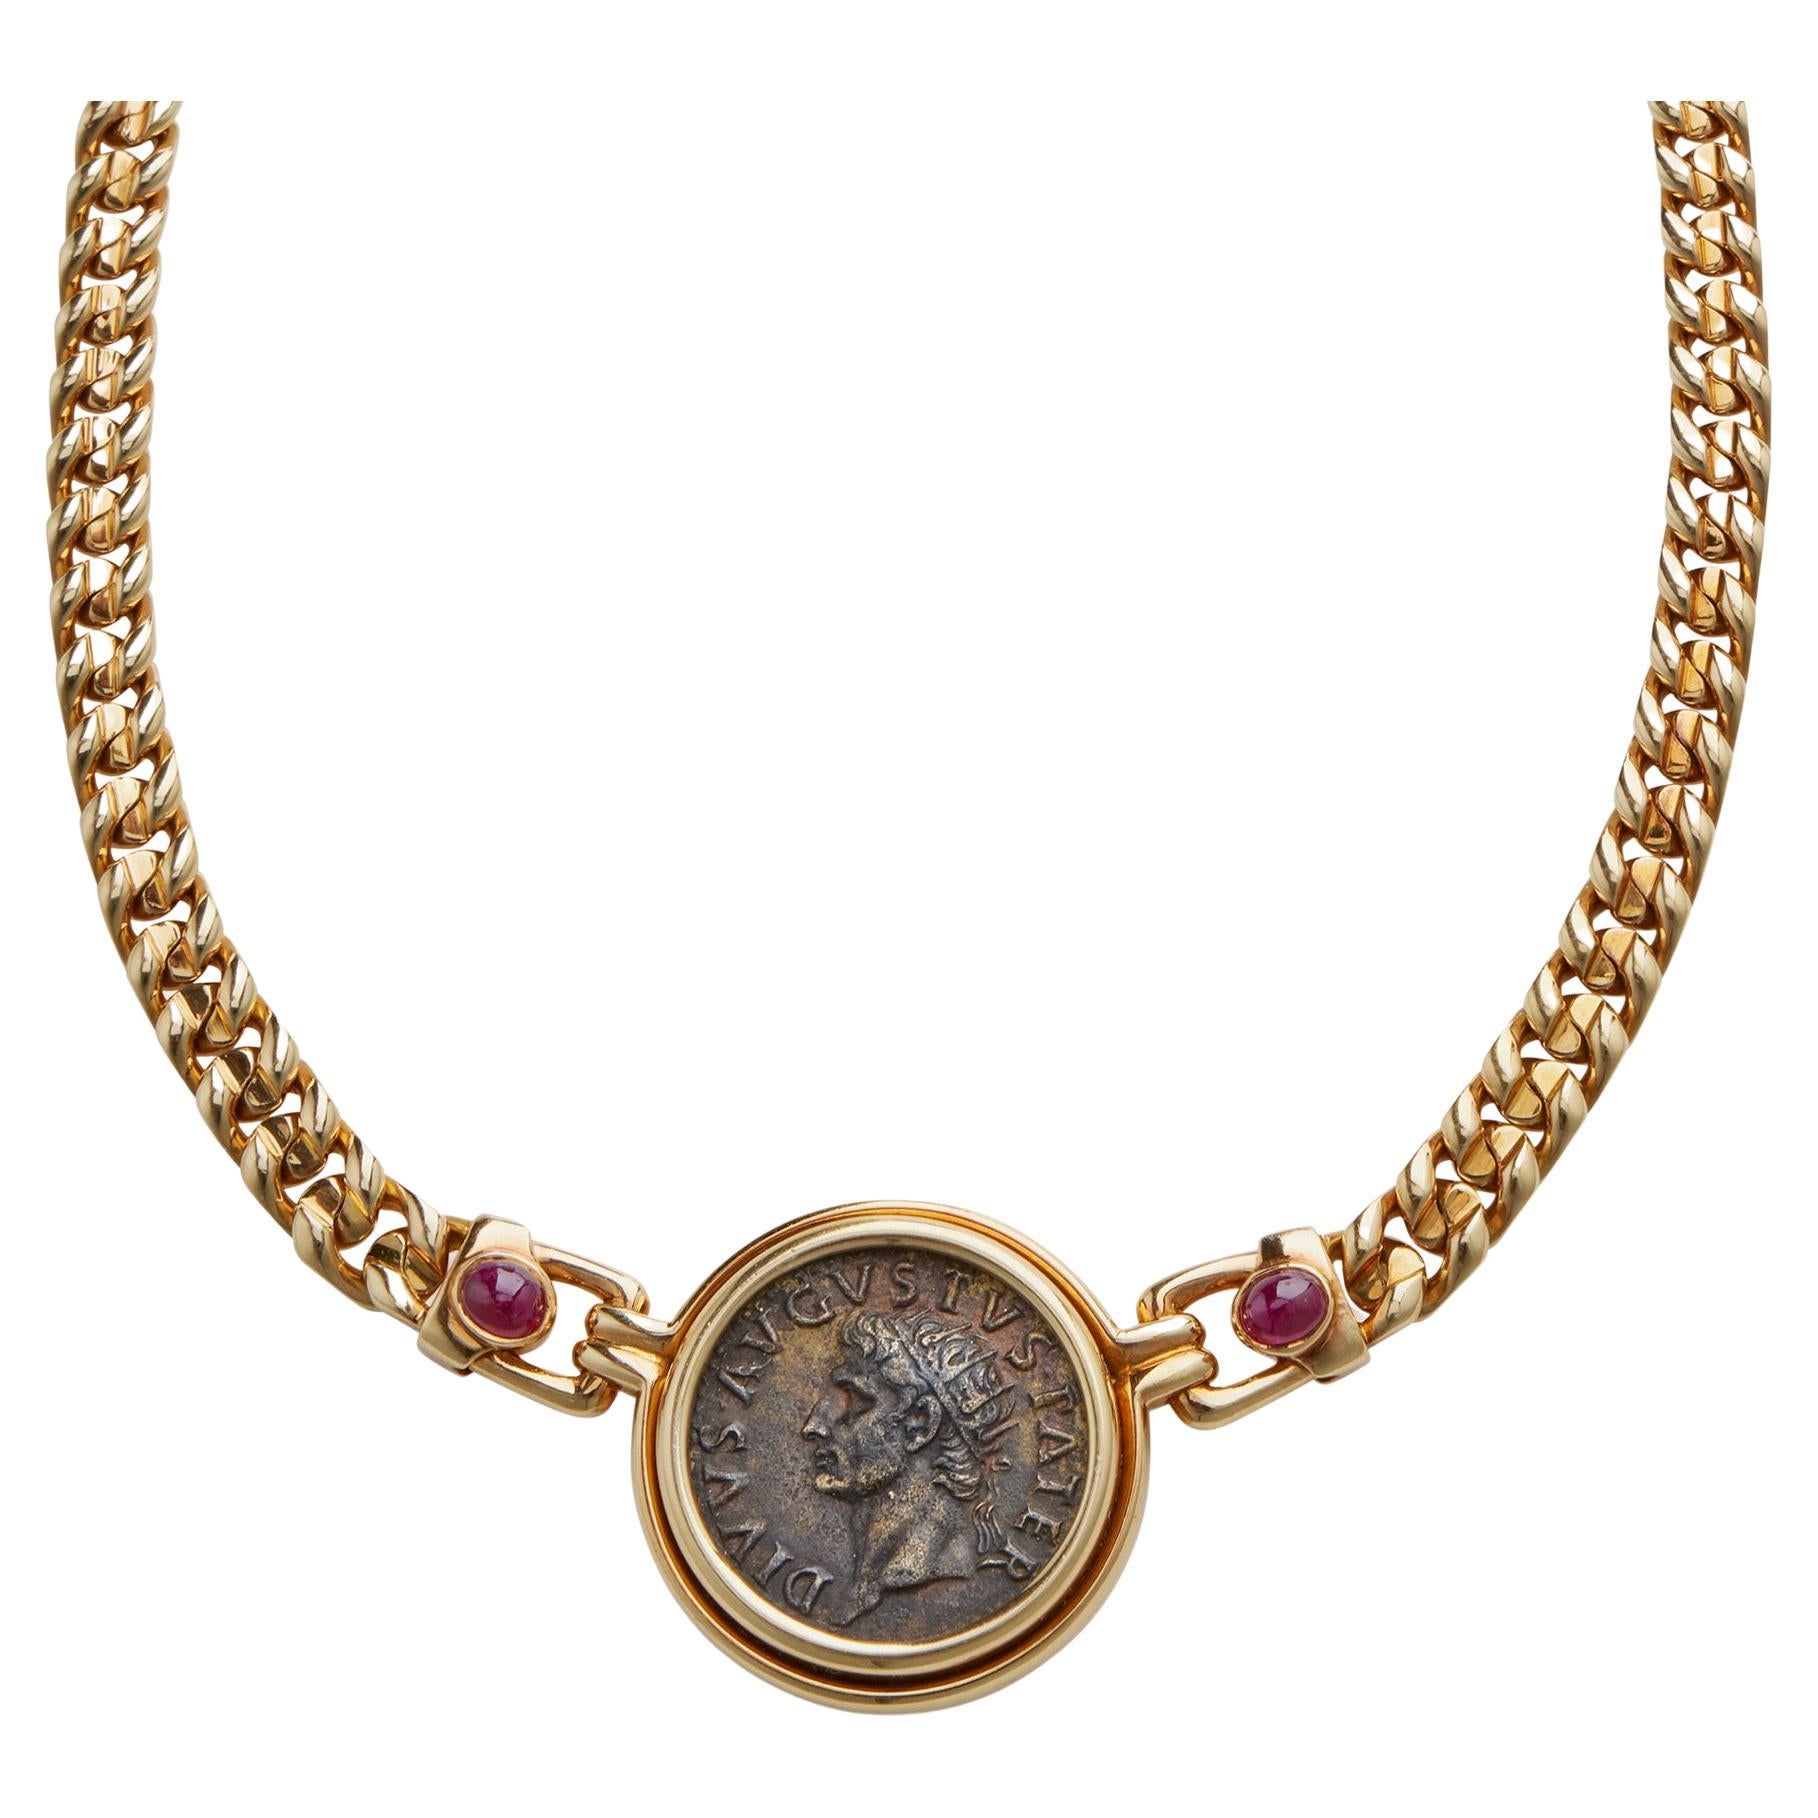 Bulgari Monete Medieval Coin Gold Necklace - Eleuteri | Bvlgari jewelry,  Gold necklace, Chain link necklace